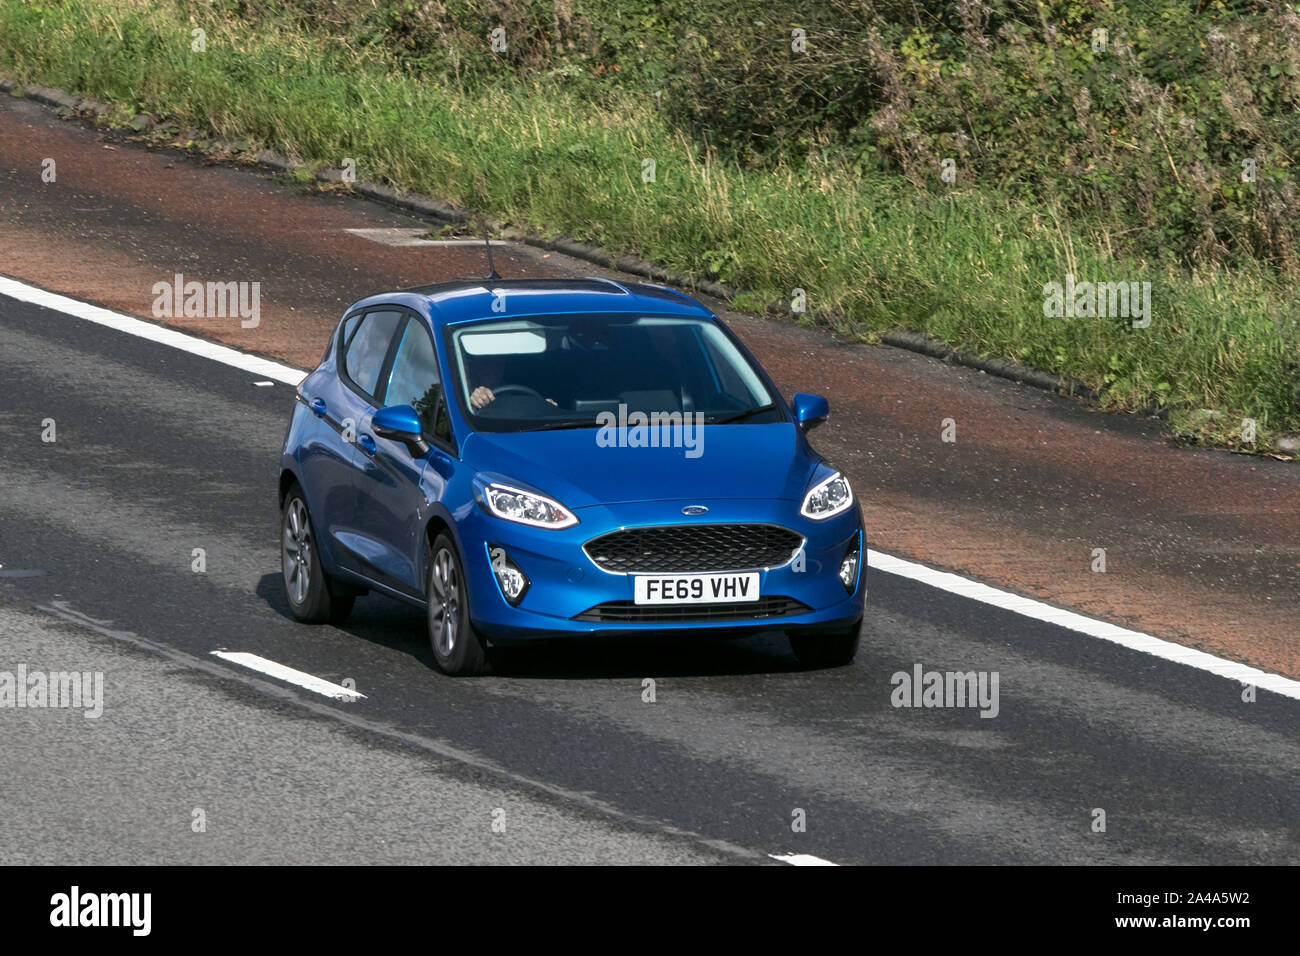 Blue Ford Fiesta High Resolution Stock Photography and Images - Alamy